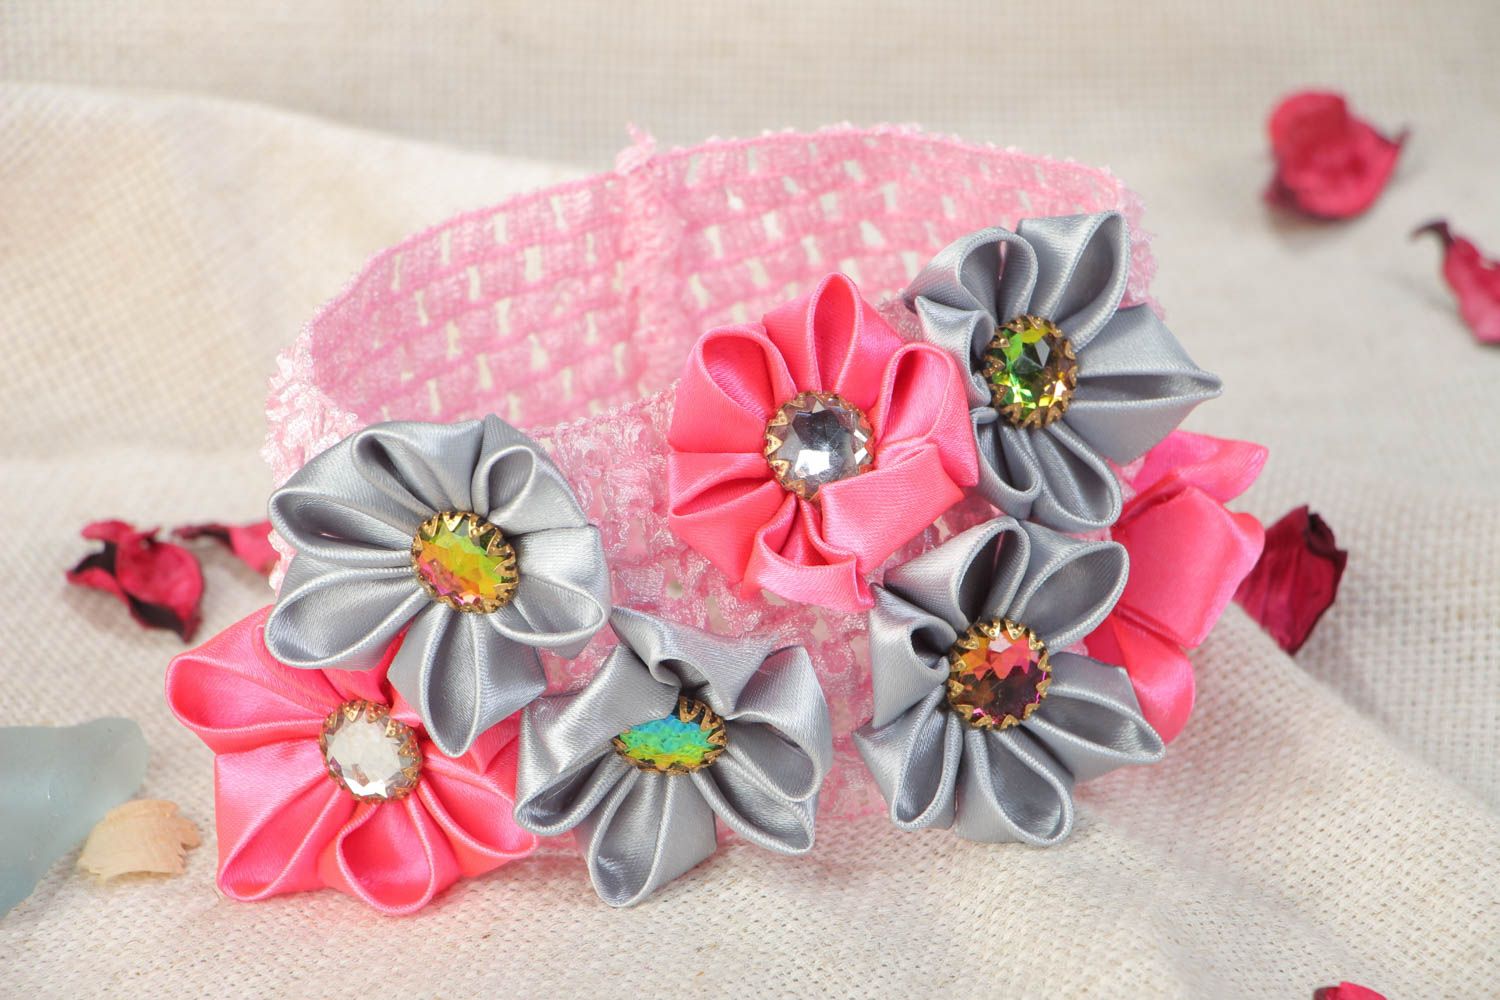 Handmade stretch headband with kanzashi satin flowers of pink and gray colors photo 1